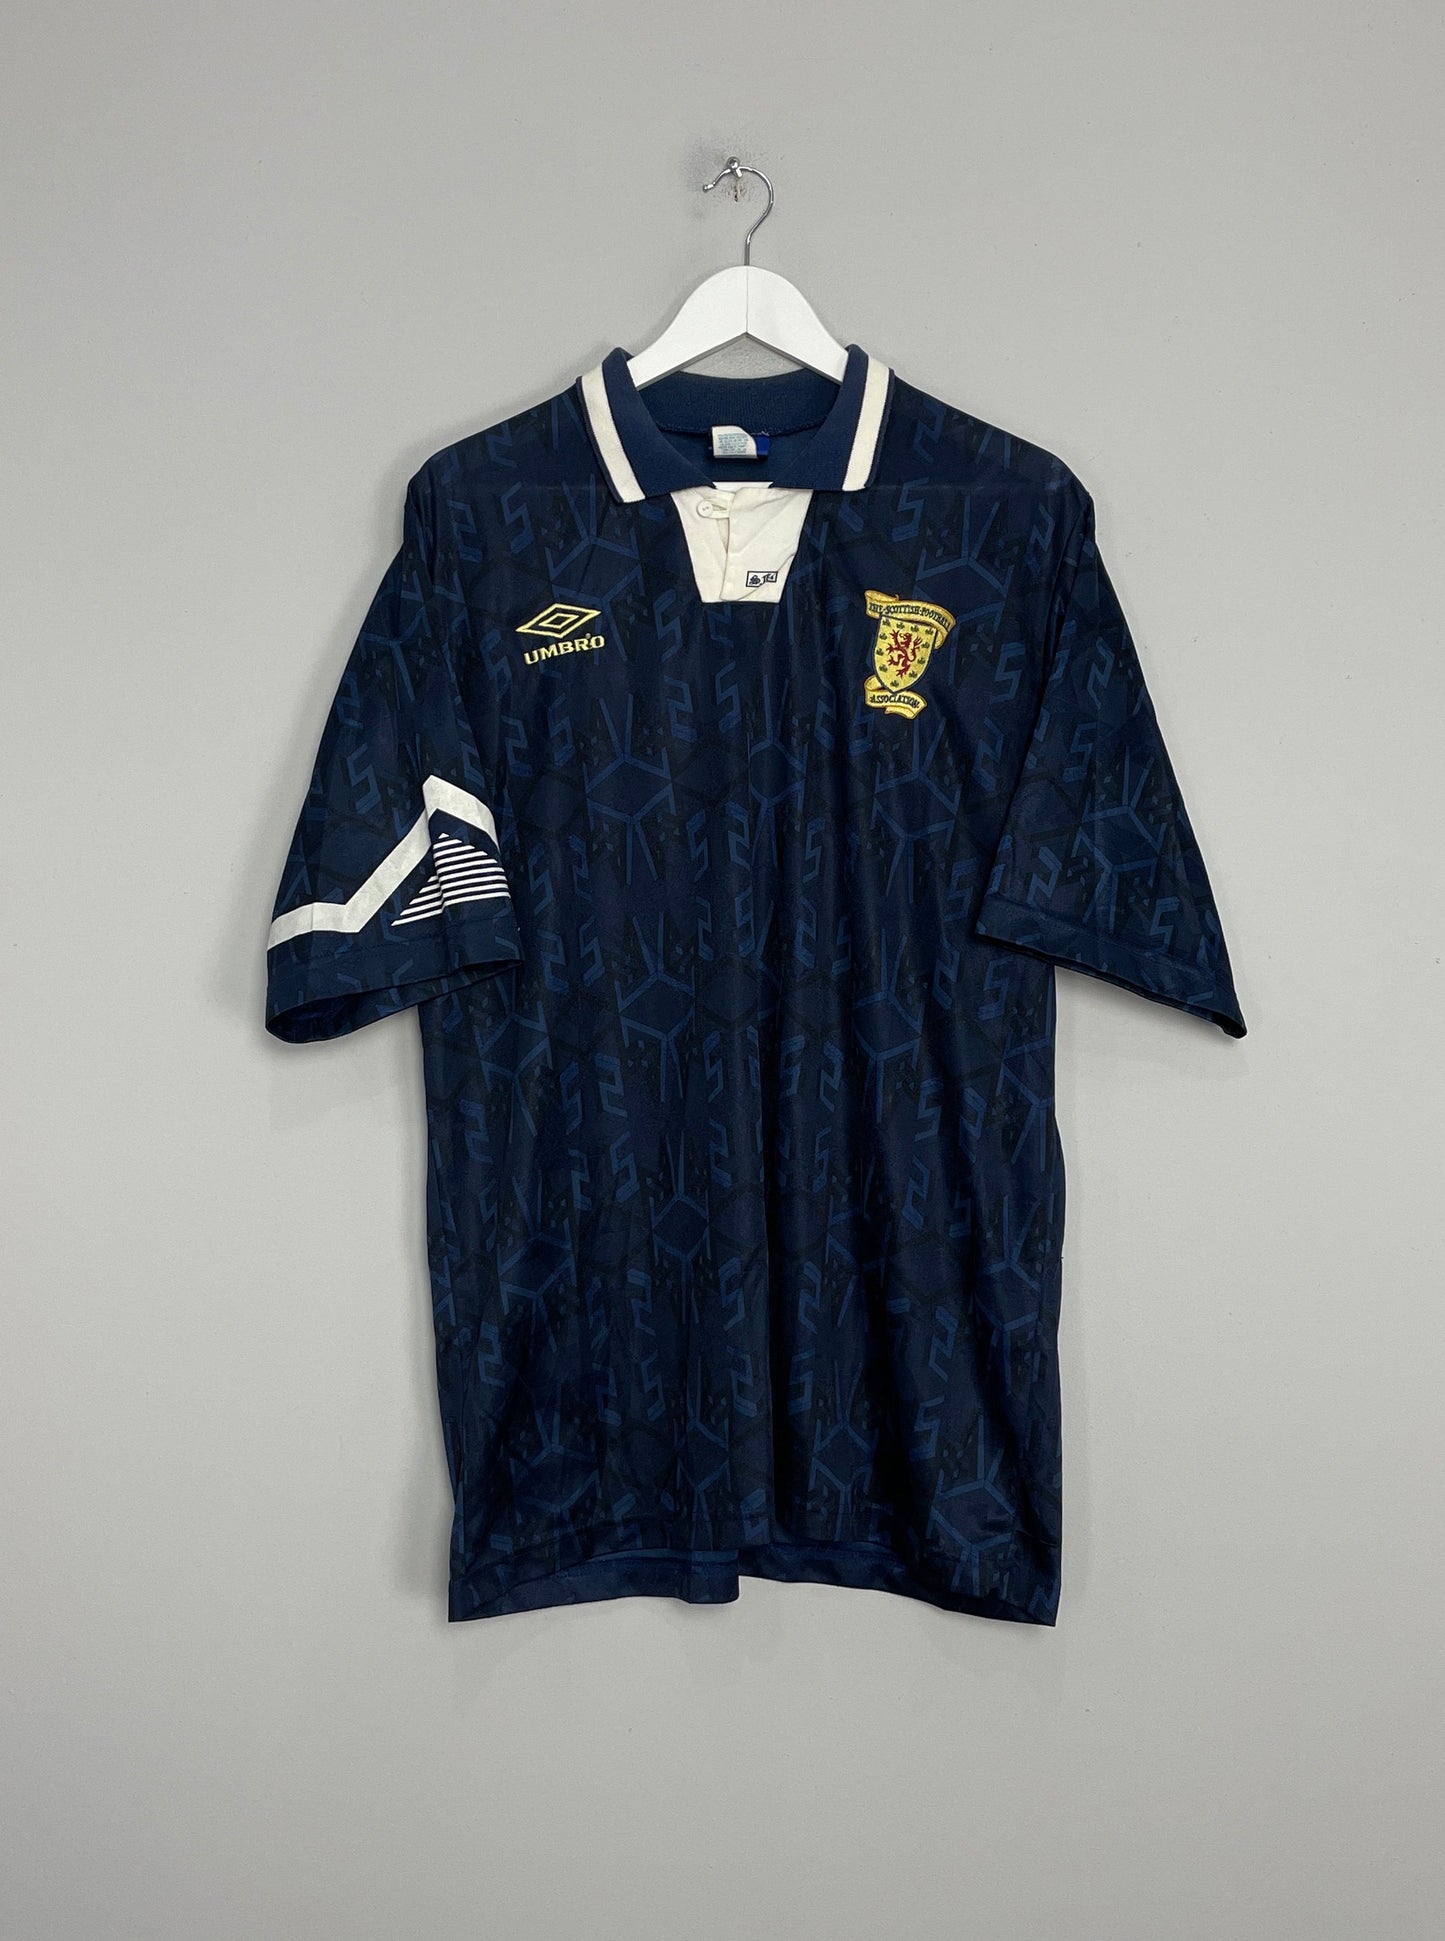 Image of the Scotland shirt from the 1992/93 season